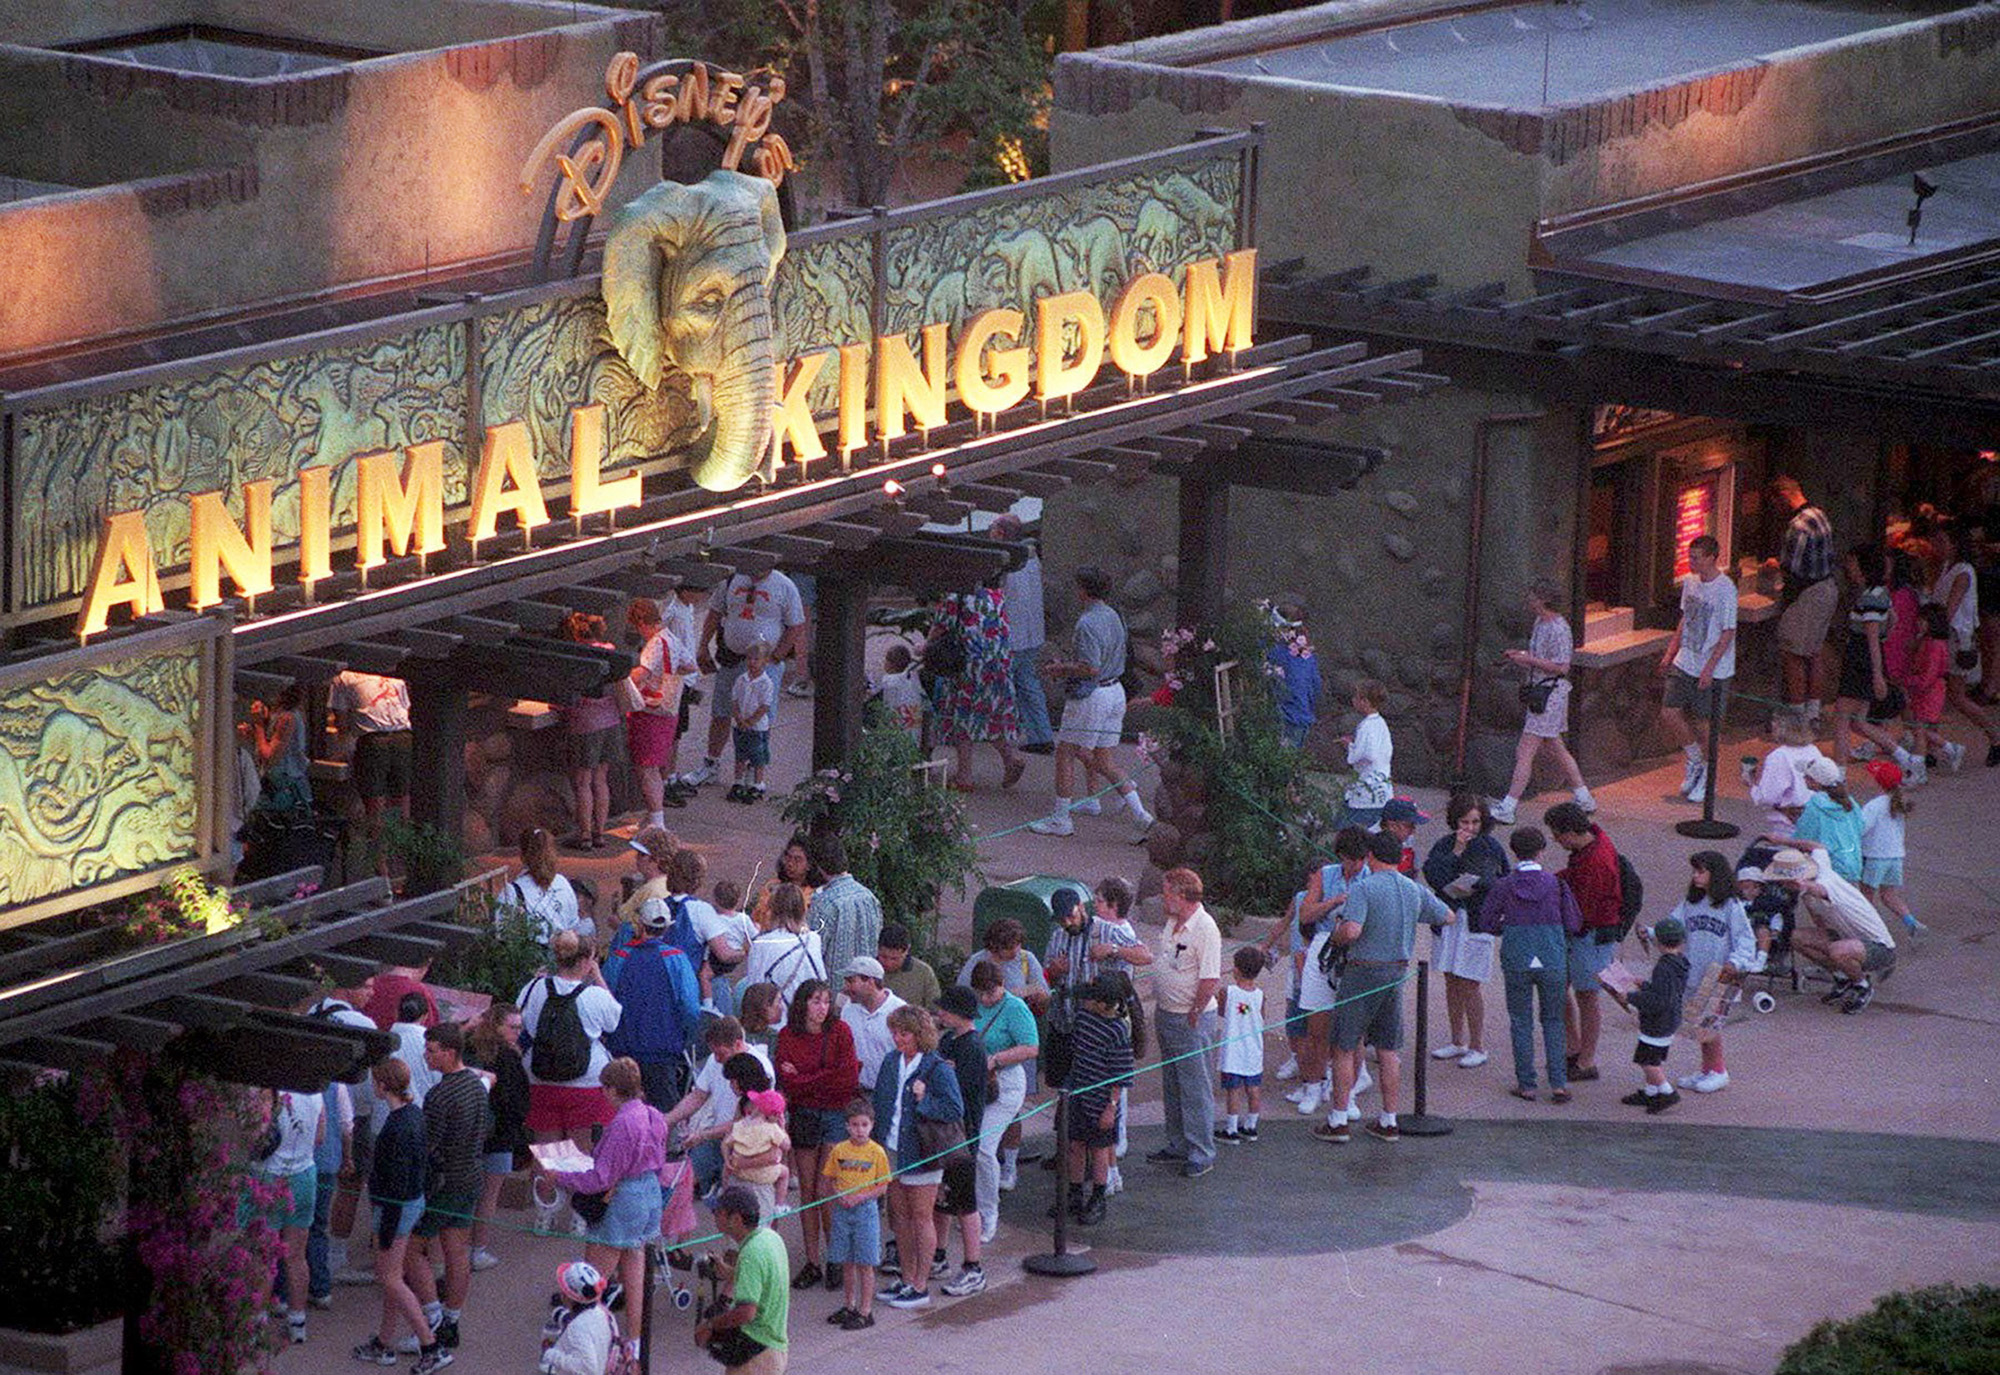 PHOTO: A crowd gathers at the entrance of Disney's Animal Kingdom in Orlando, Fla., in an undated photo.